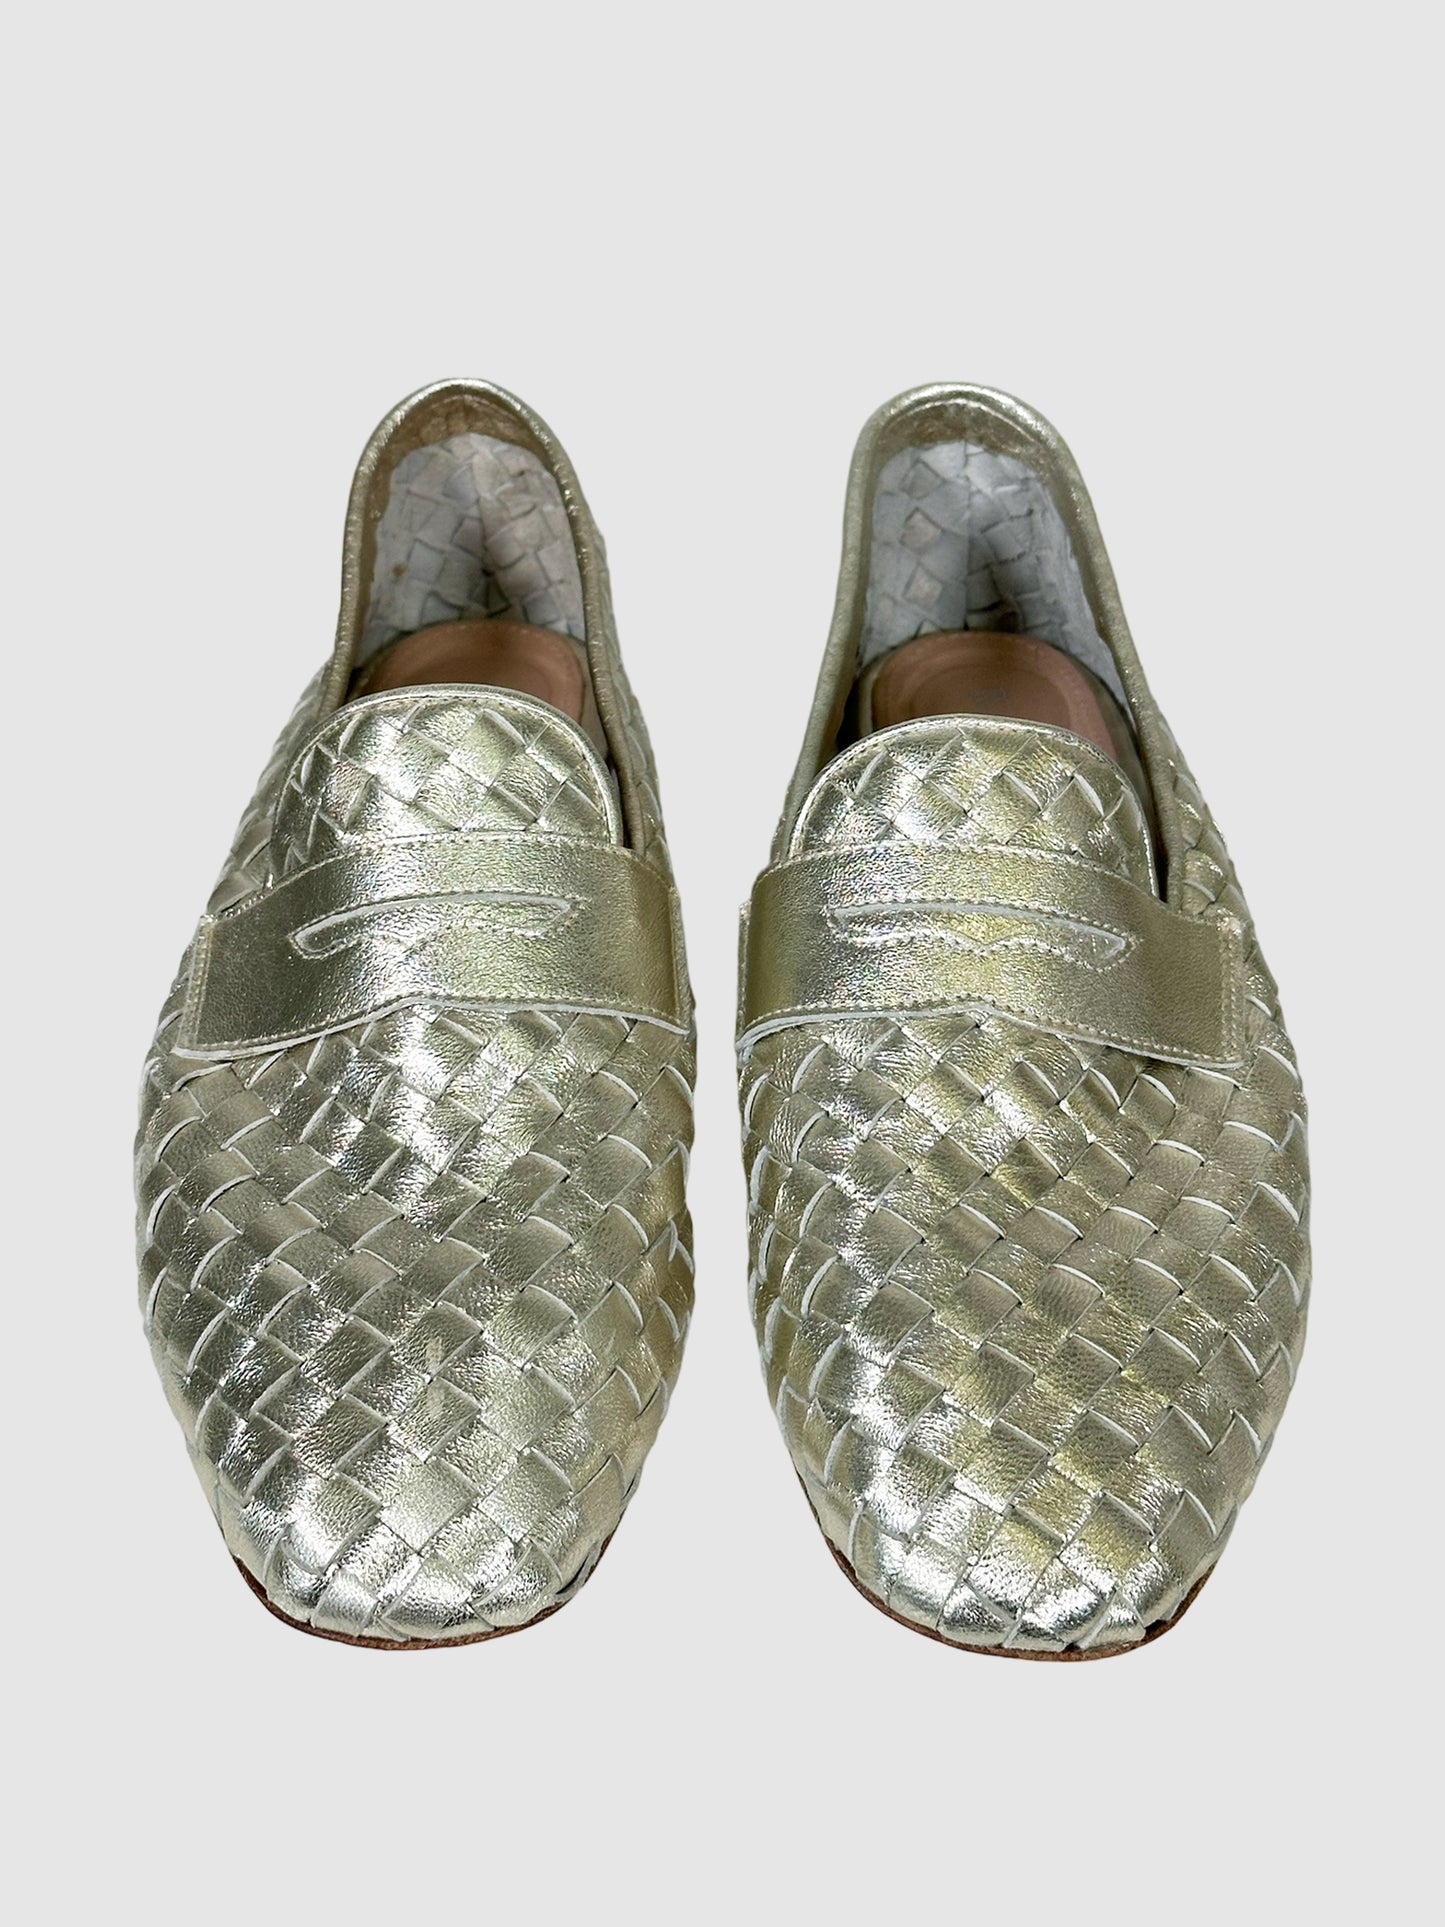 Woven Leather Loafers - Size 39.5